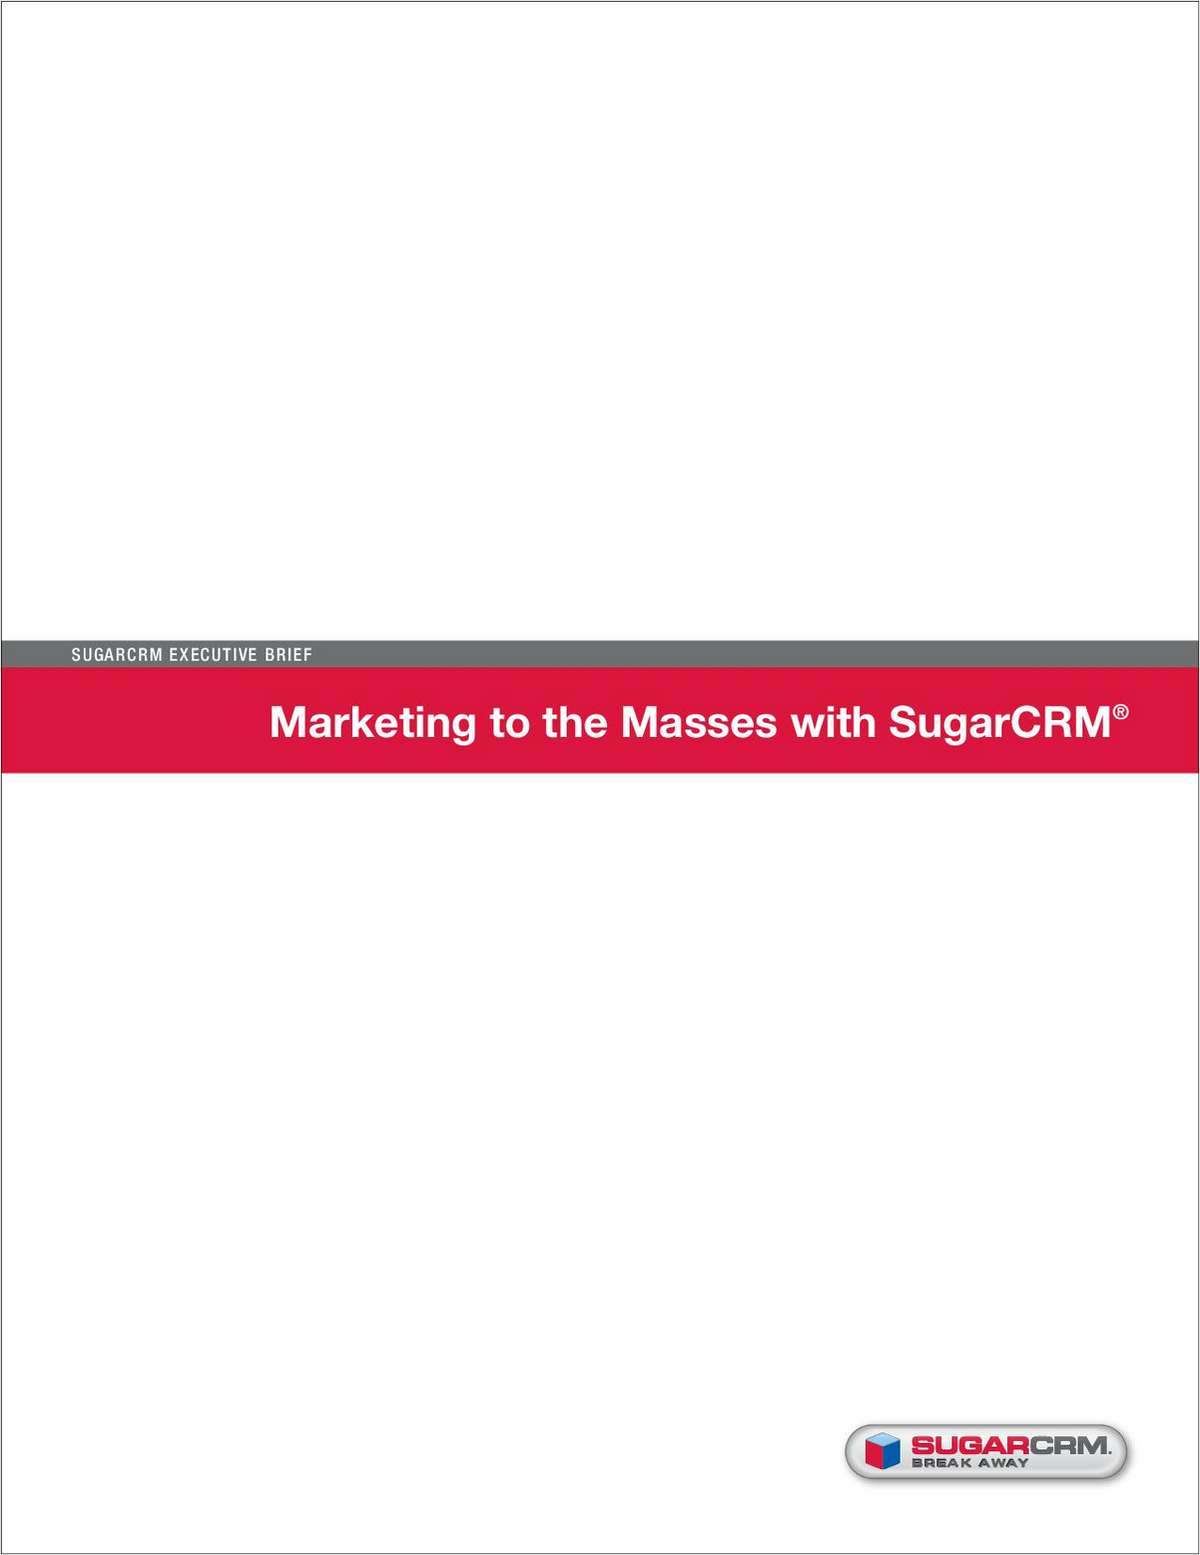 Marketing to the Masses with SugarCRM